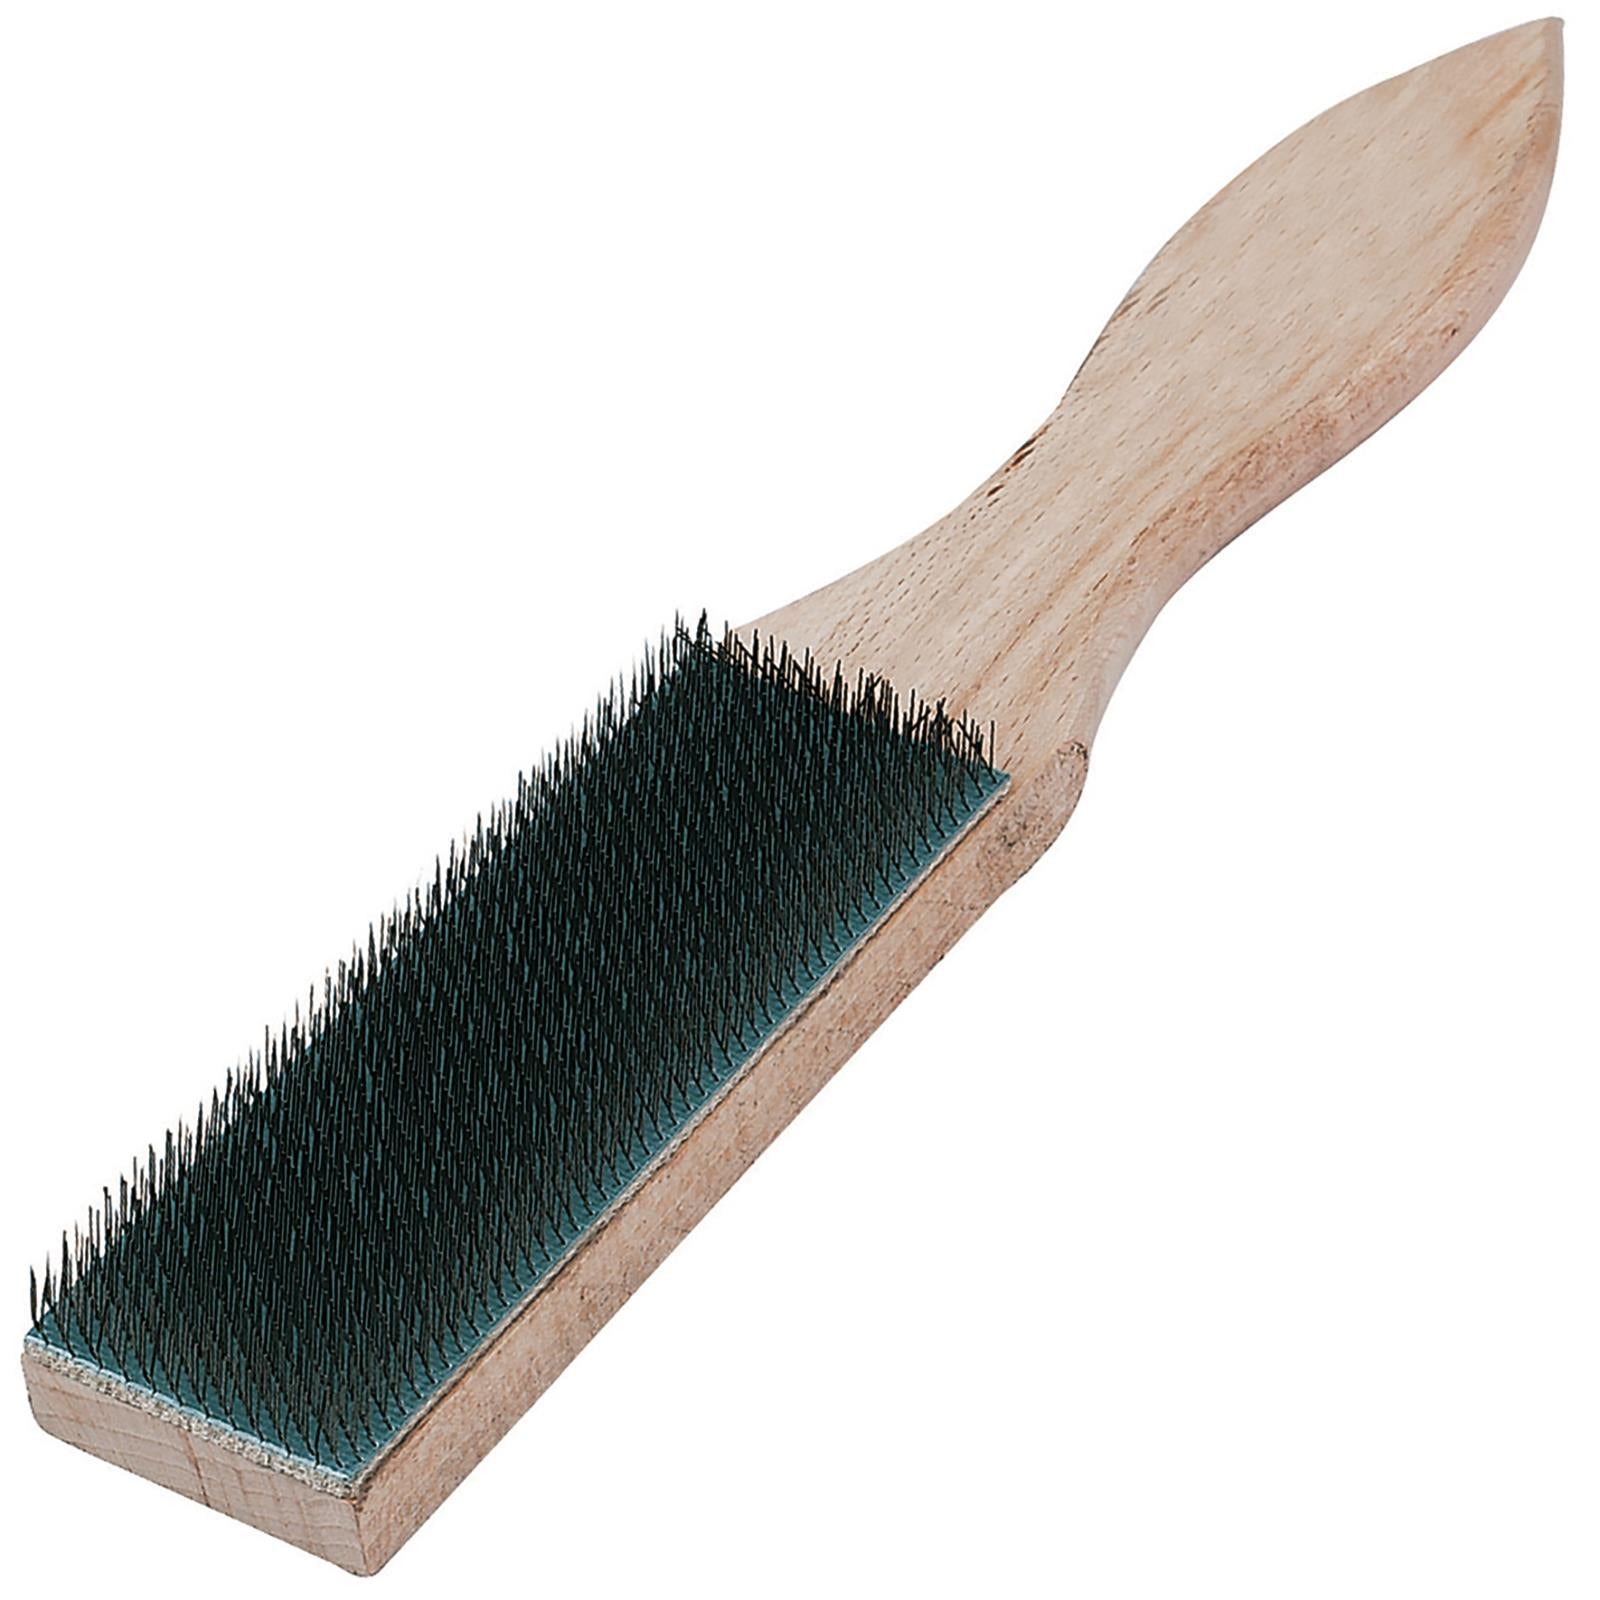 Silverline File Card Wire Brush Wooden 40 mm